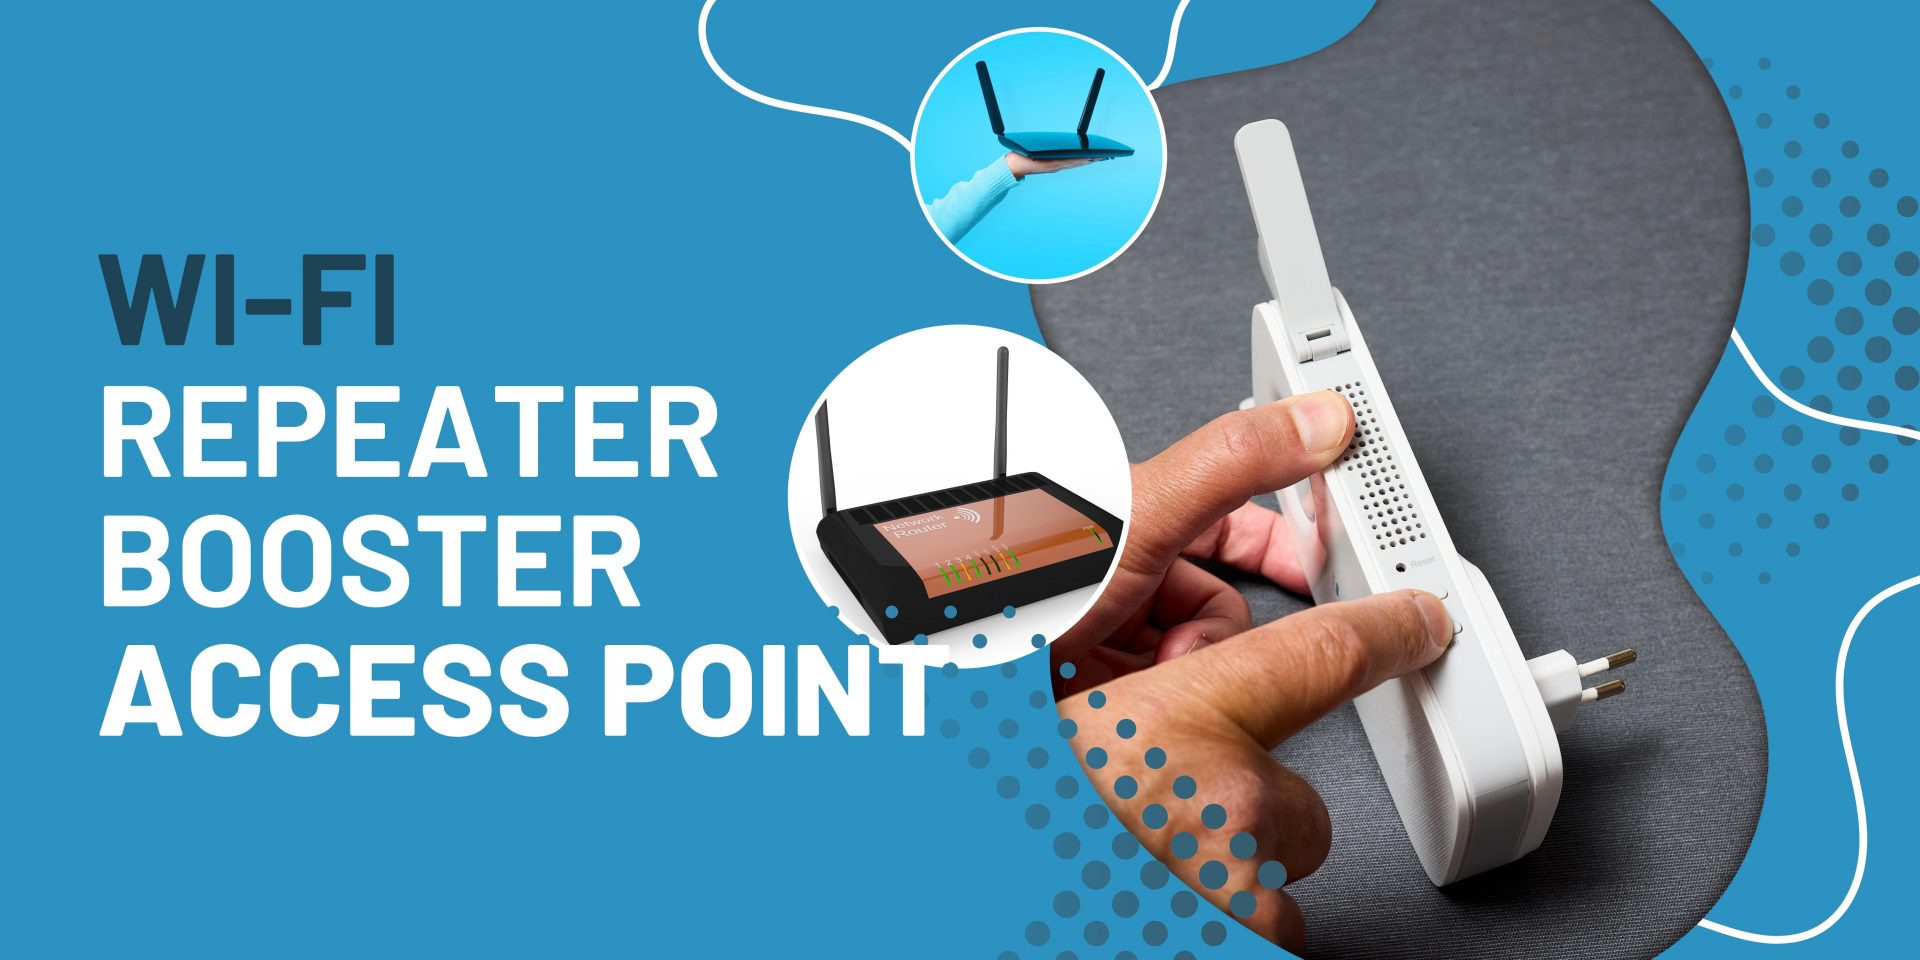 WiFi Access Point Repeater Booster